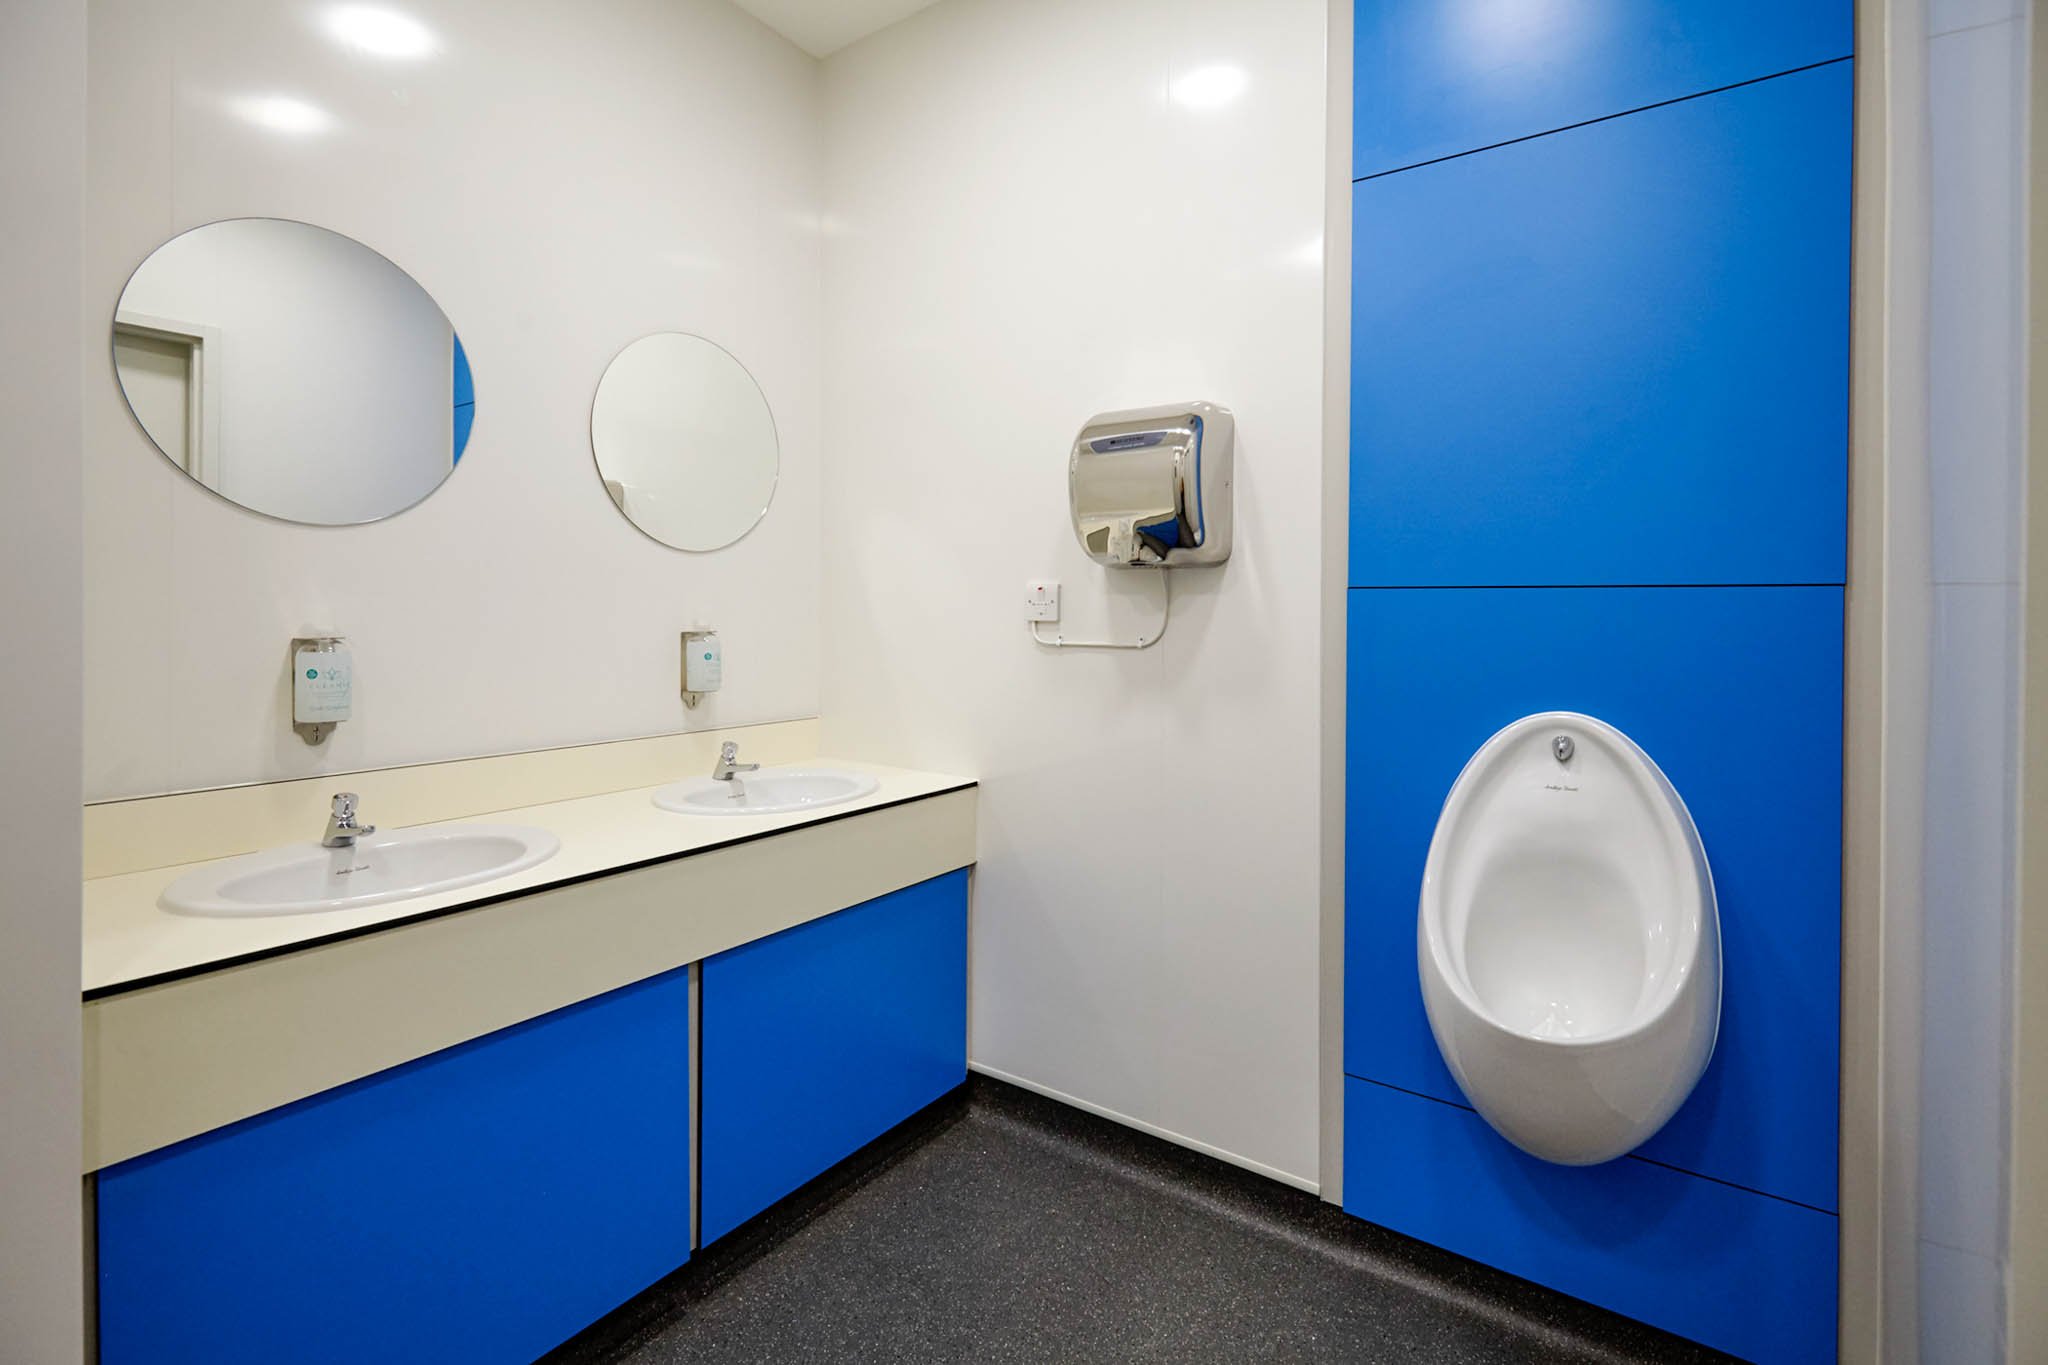 blue duct panel with urinal and a vanity unit with sinks and mirrors above at national maritime museum.jpg